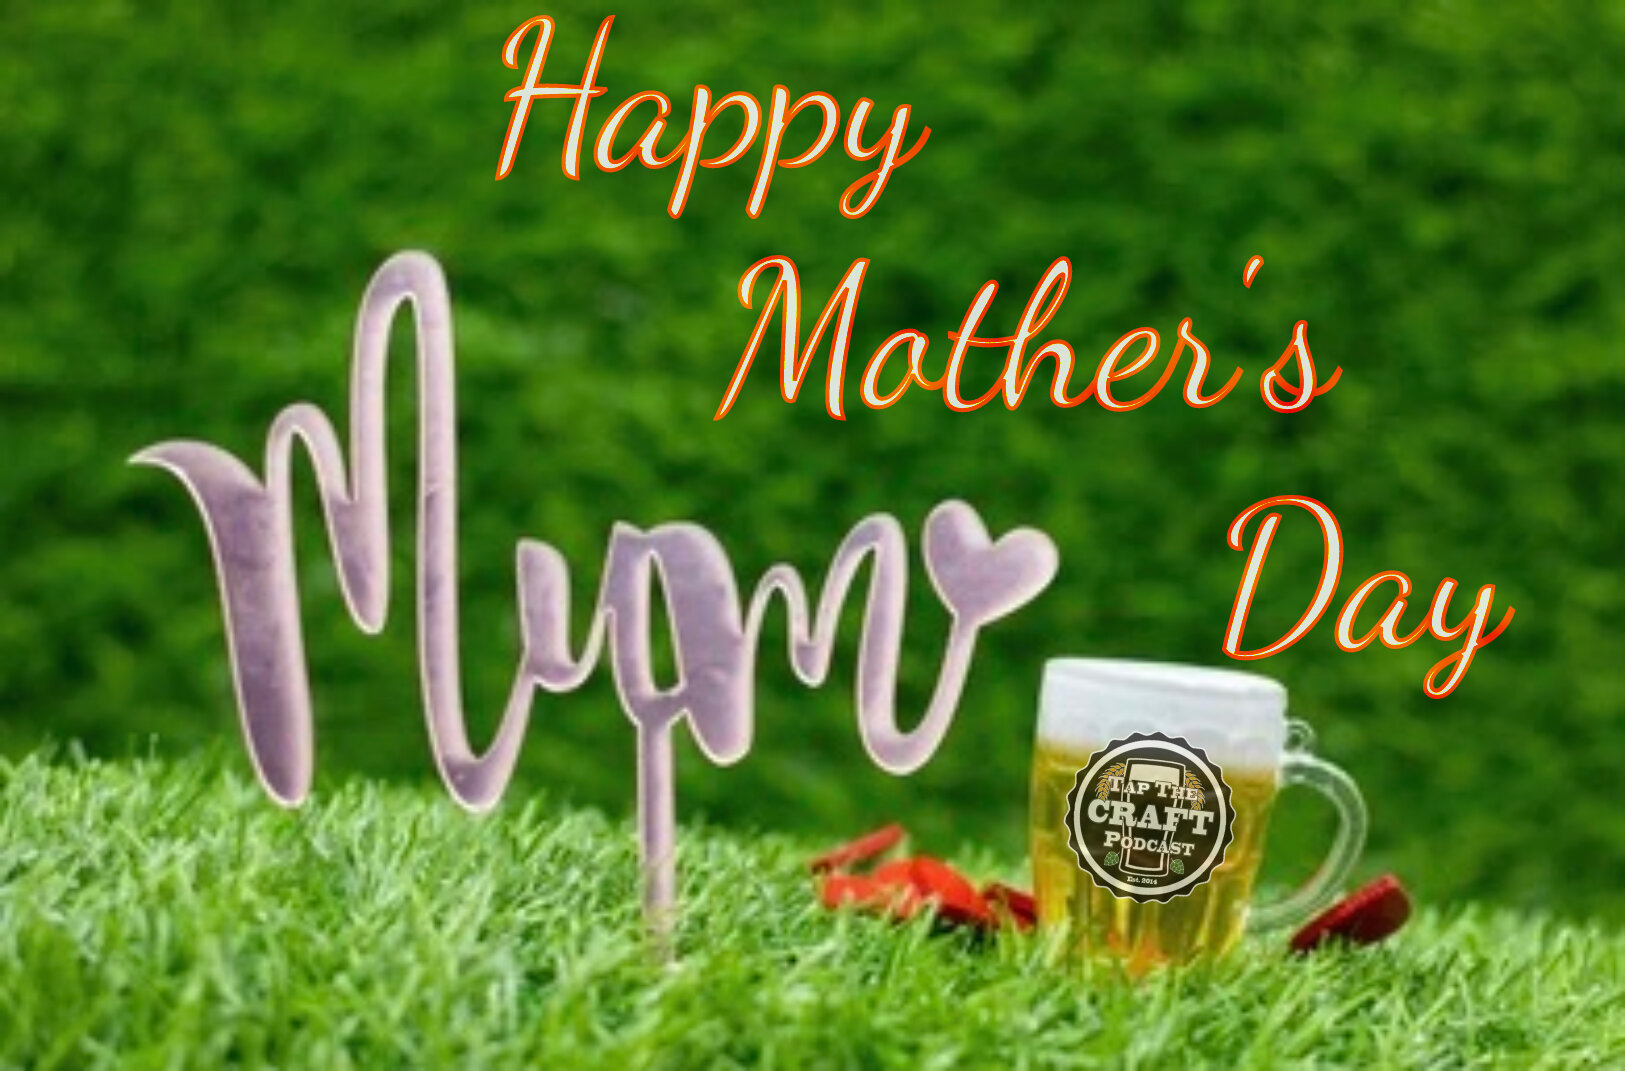 Cheers to you Mom.  We hope you have an incredible day #weloveyou #happymothersday #happymothersday❤️ #Cheers #cheerstoyou